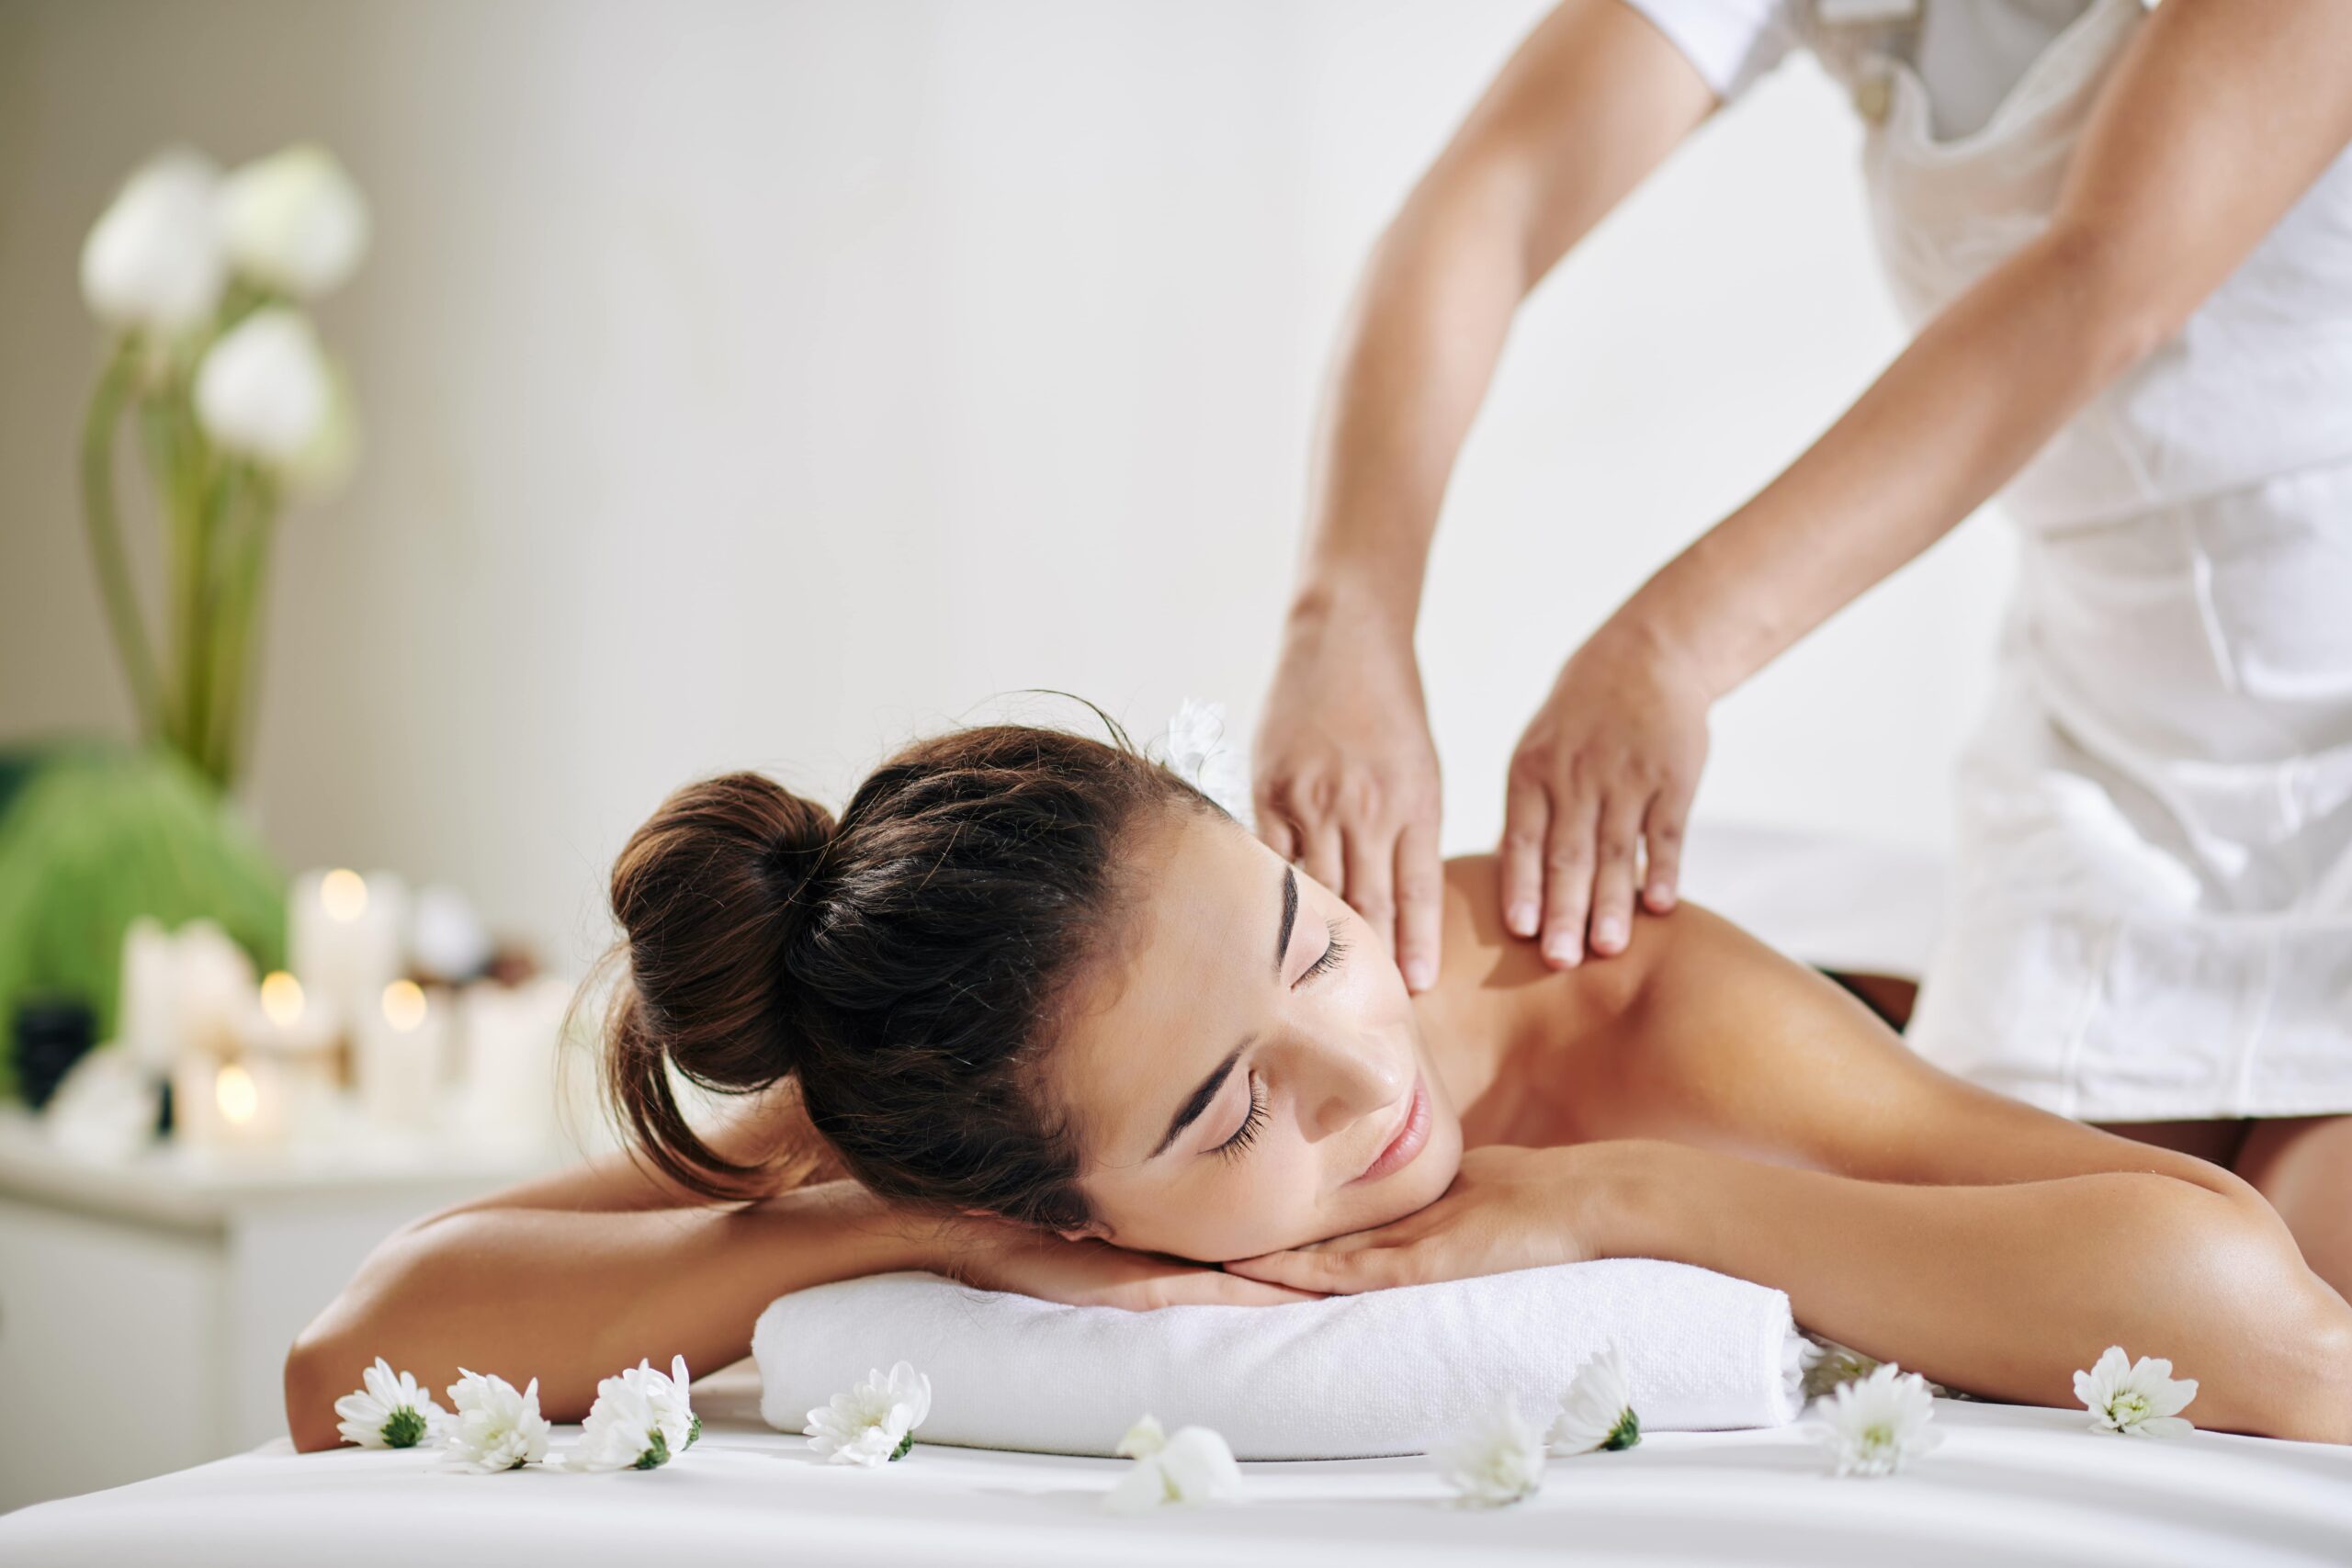 What Are the Responsibilities of a Massage Therapist scaled